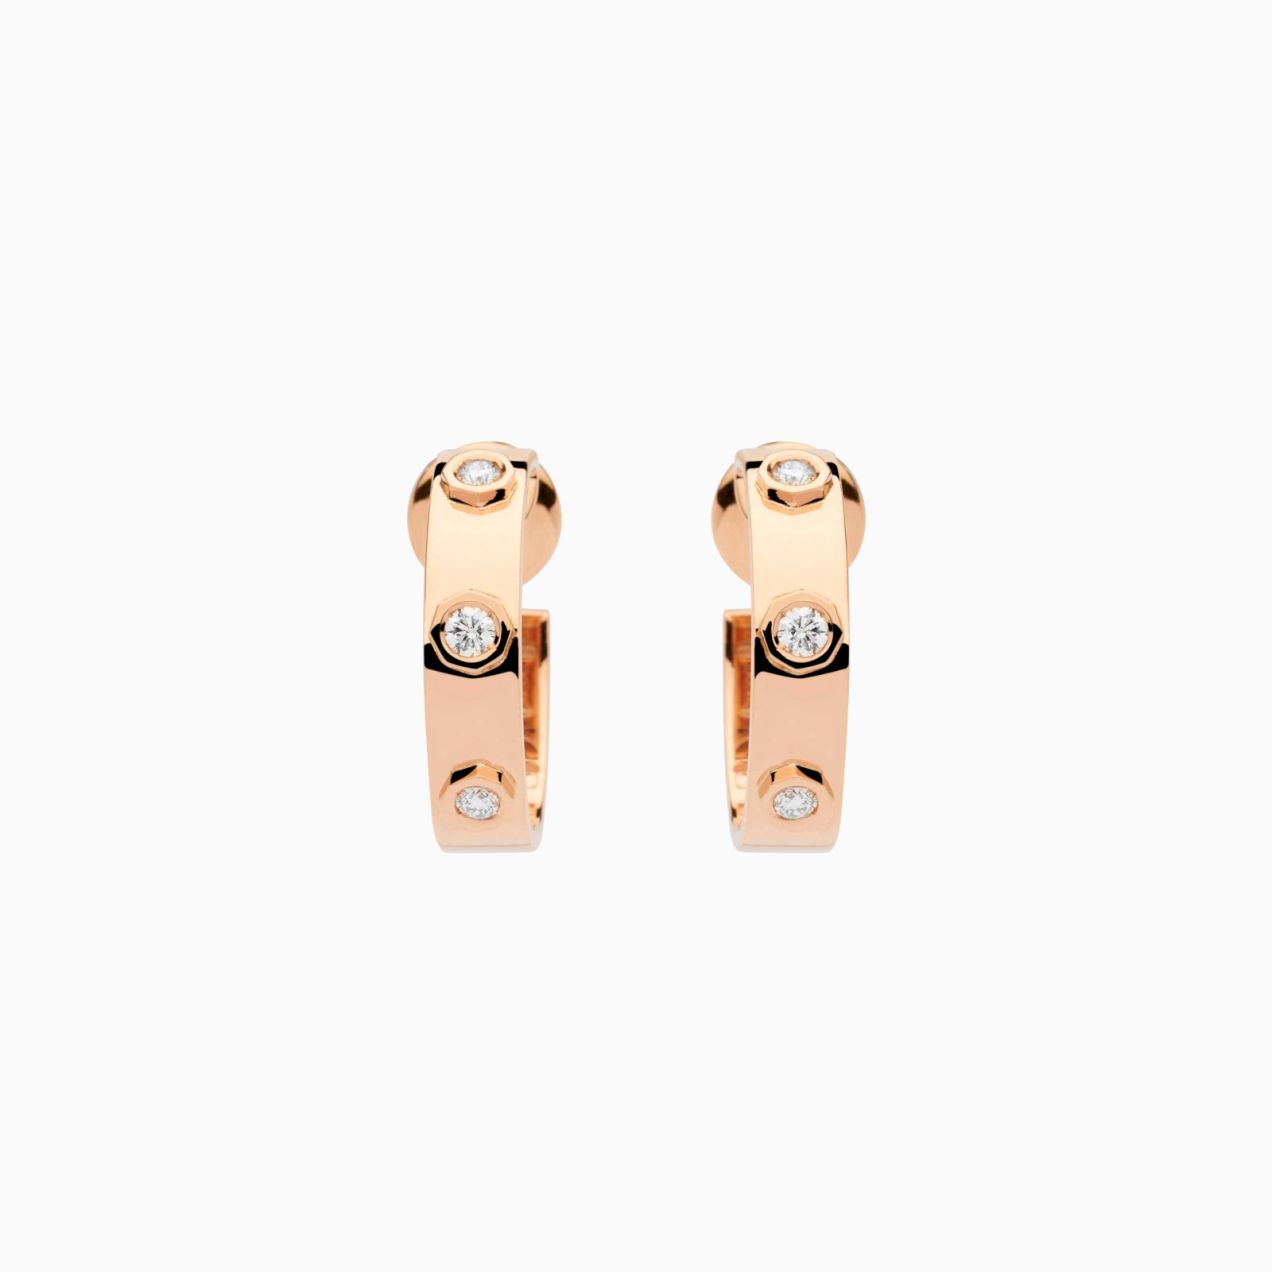 Rose gold earrings with three diamonds